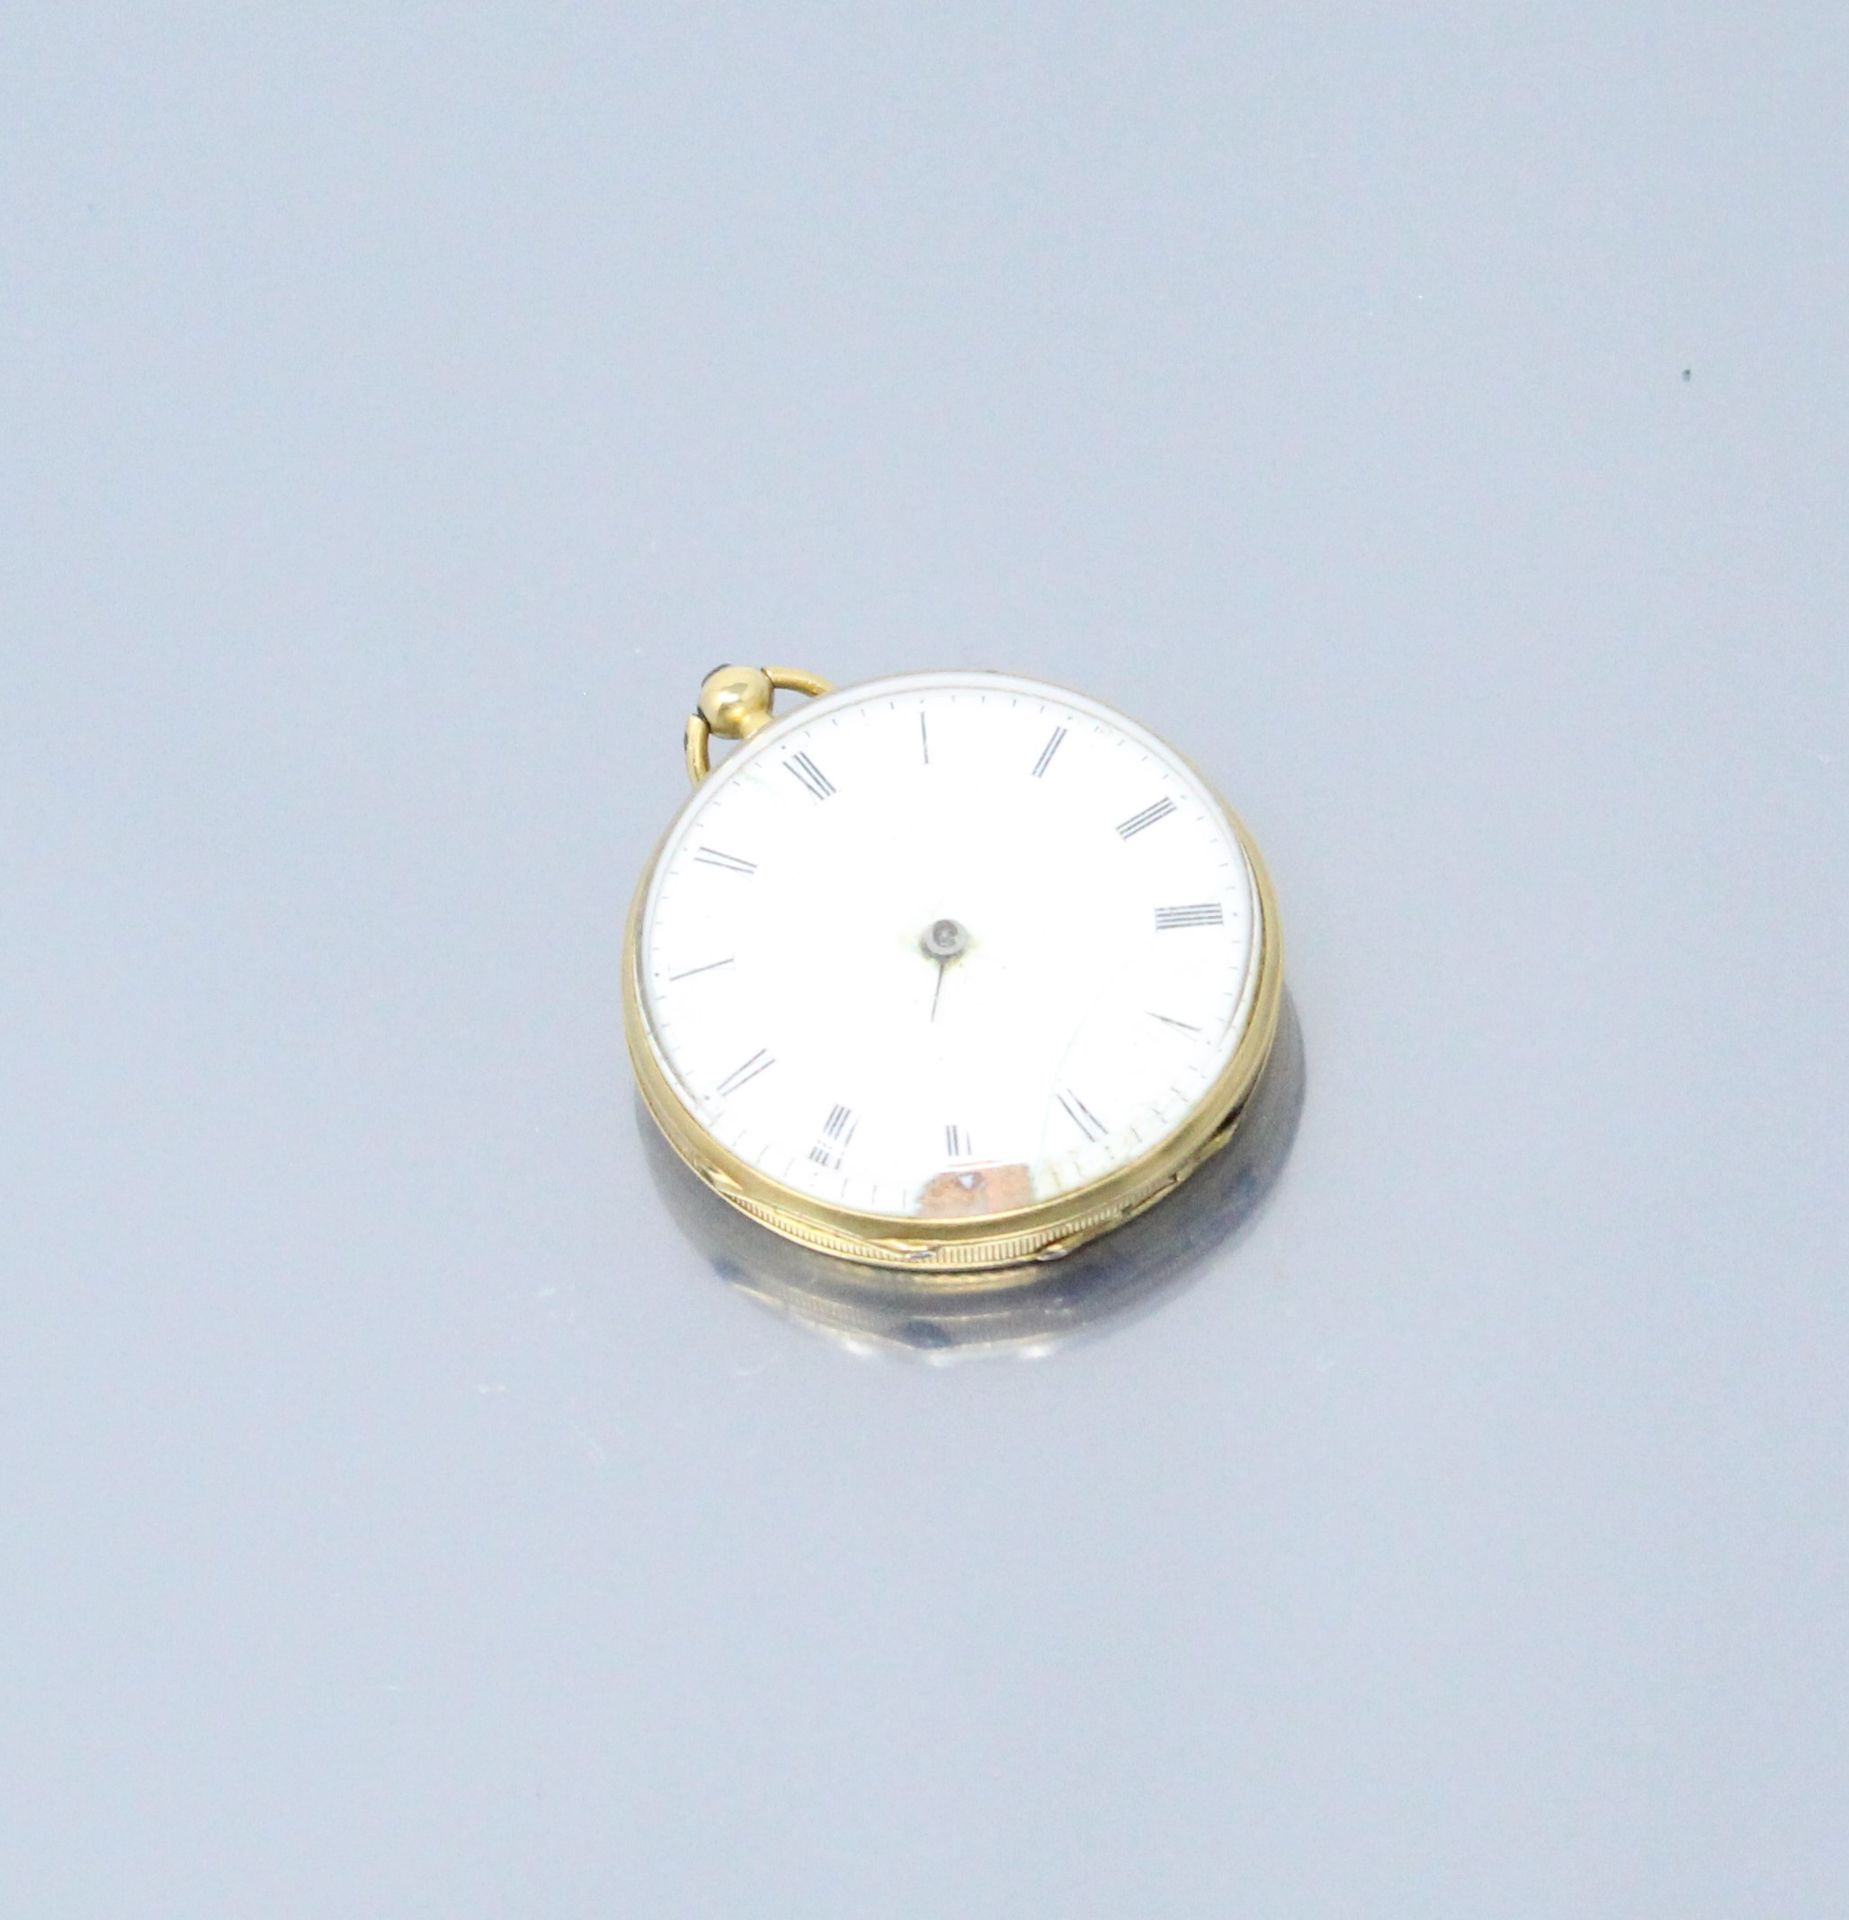 Null 18K (750) yellow gold pocket watch. Dial with white background, Roman numer&hellip;